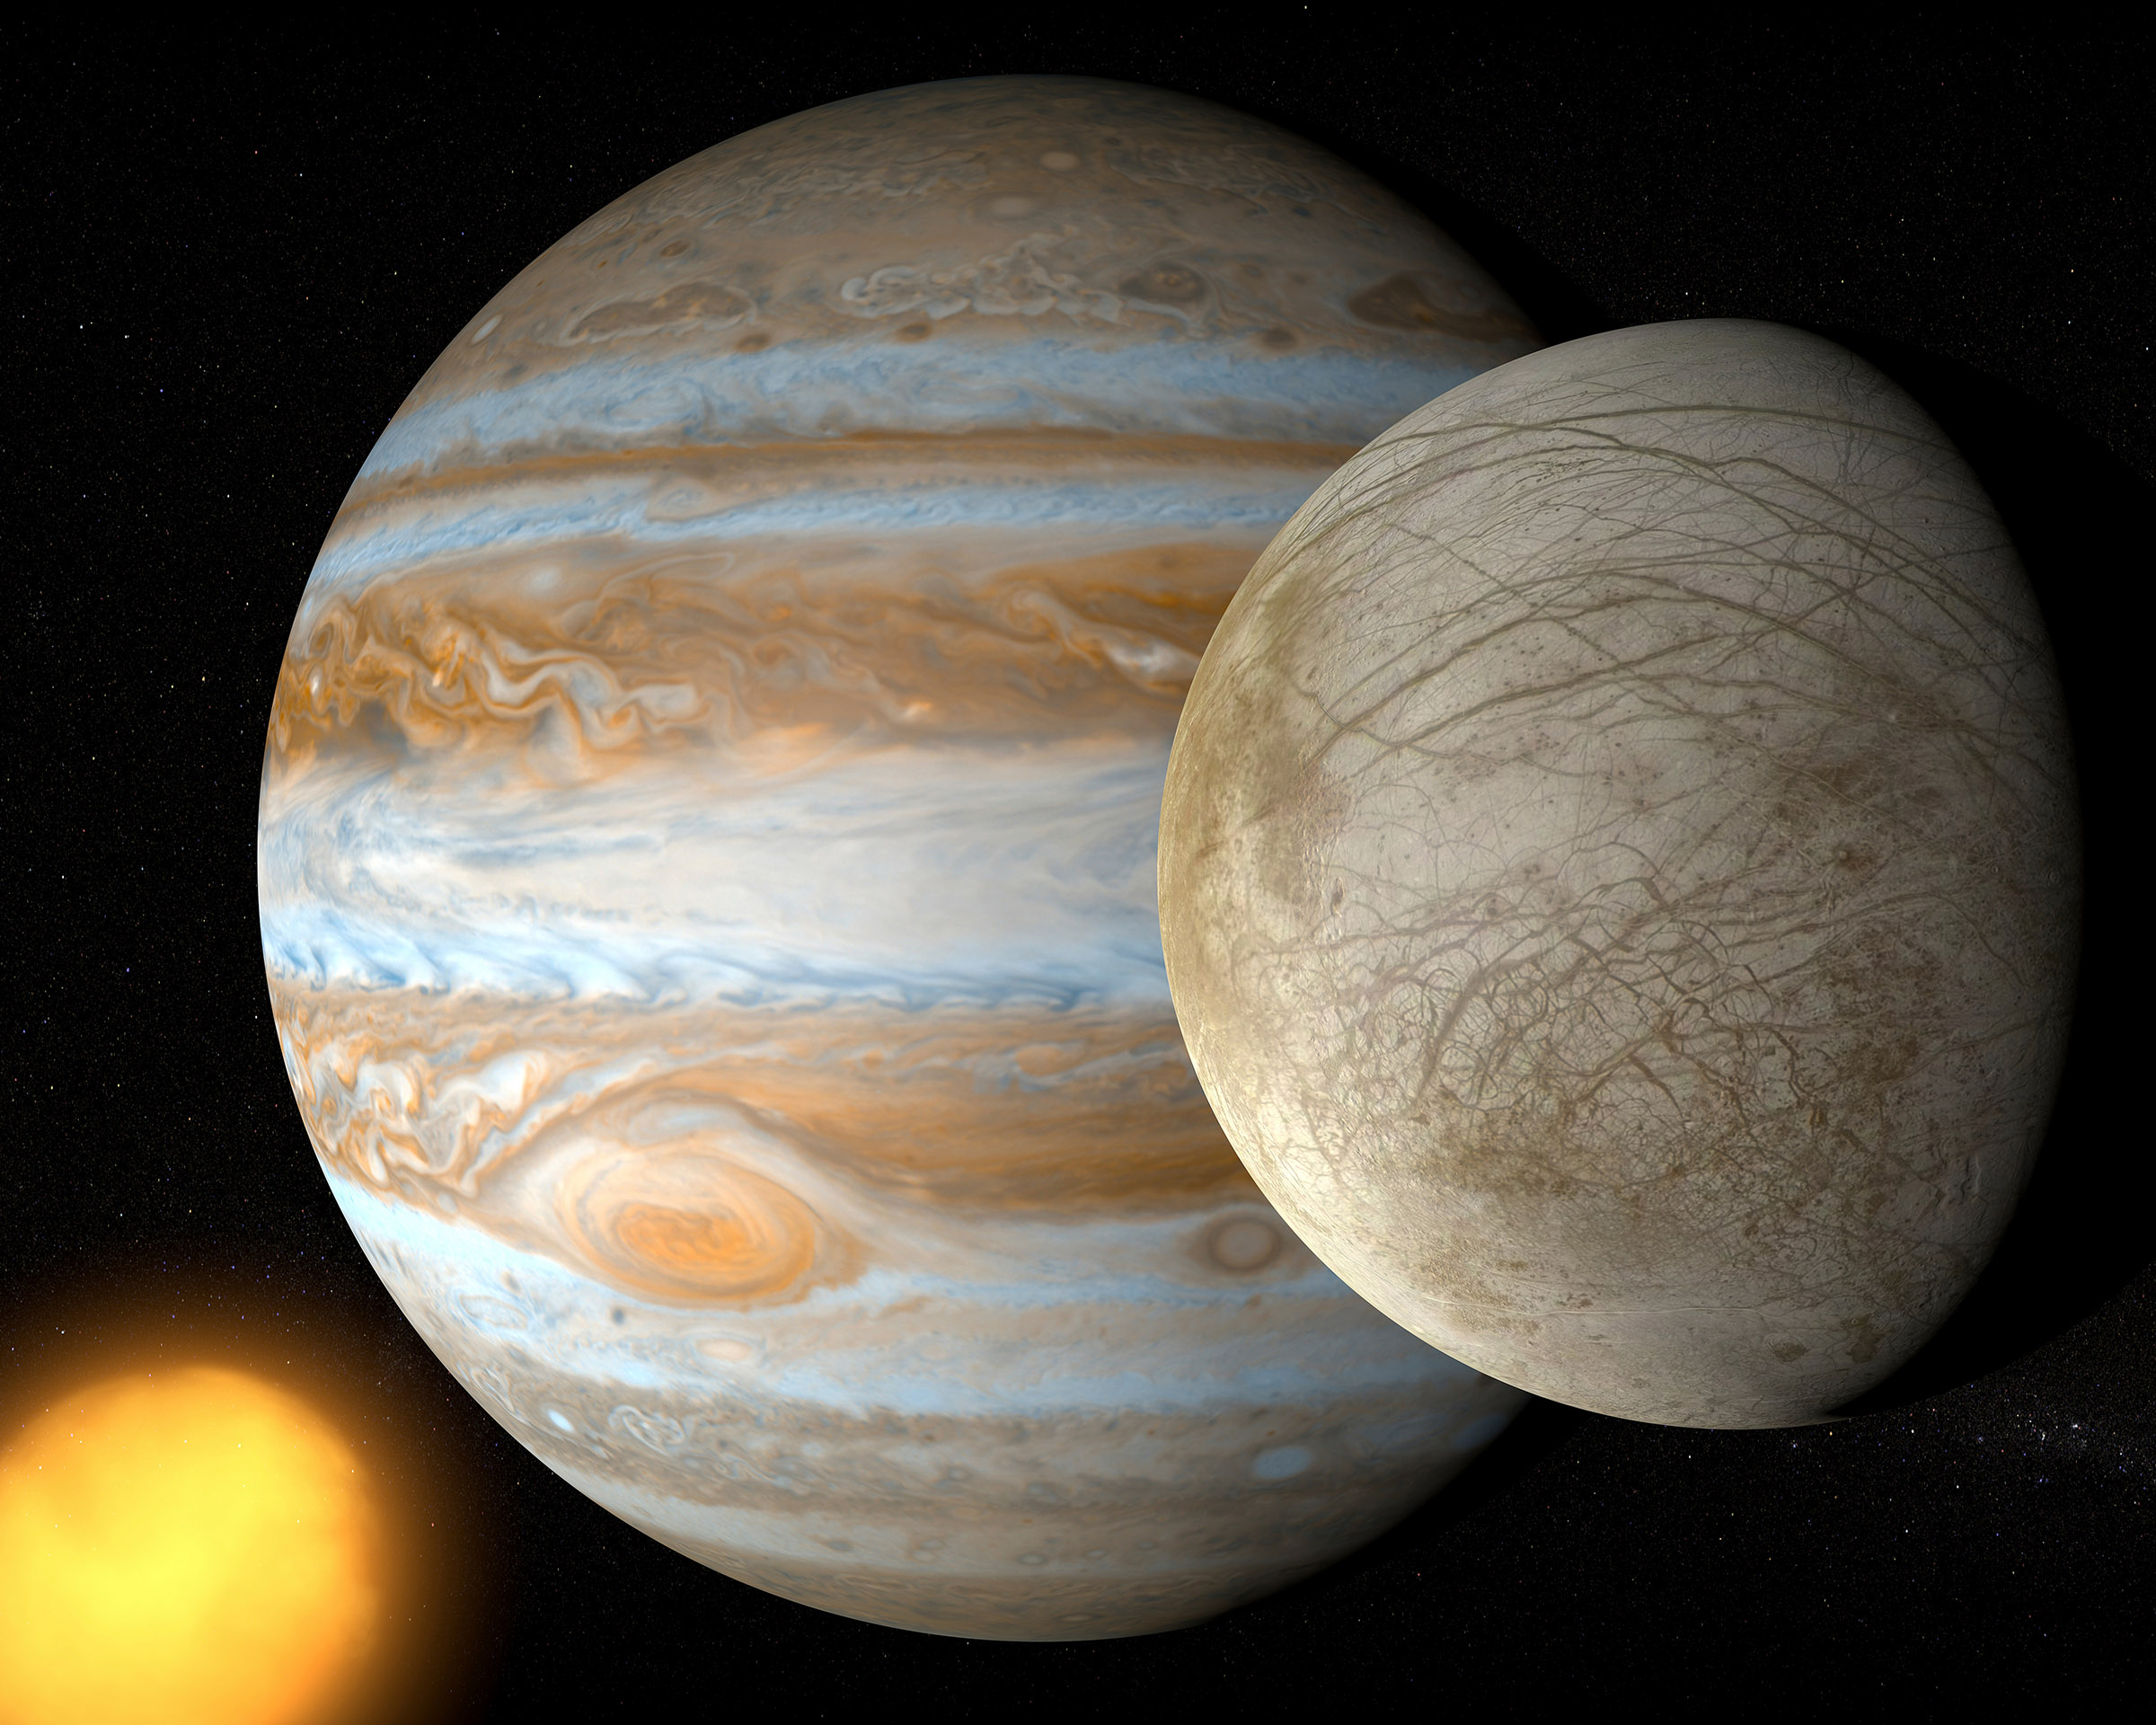 alien life could be hiding on Europa